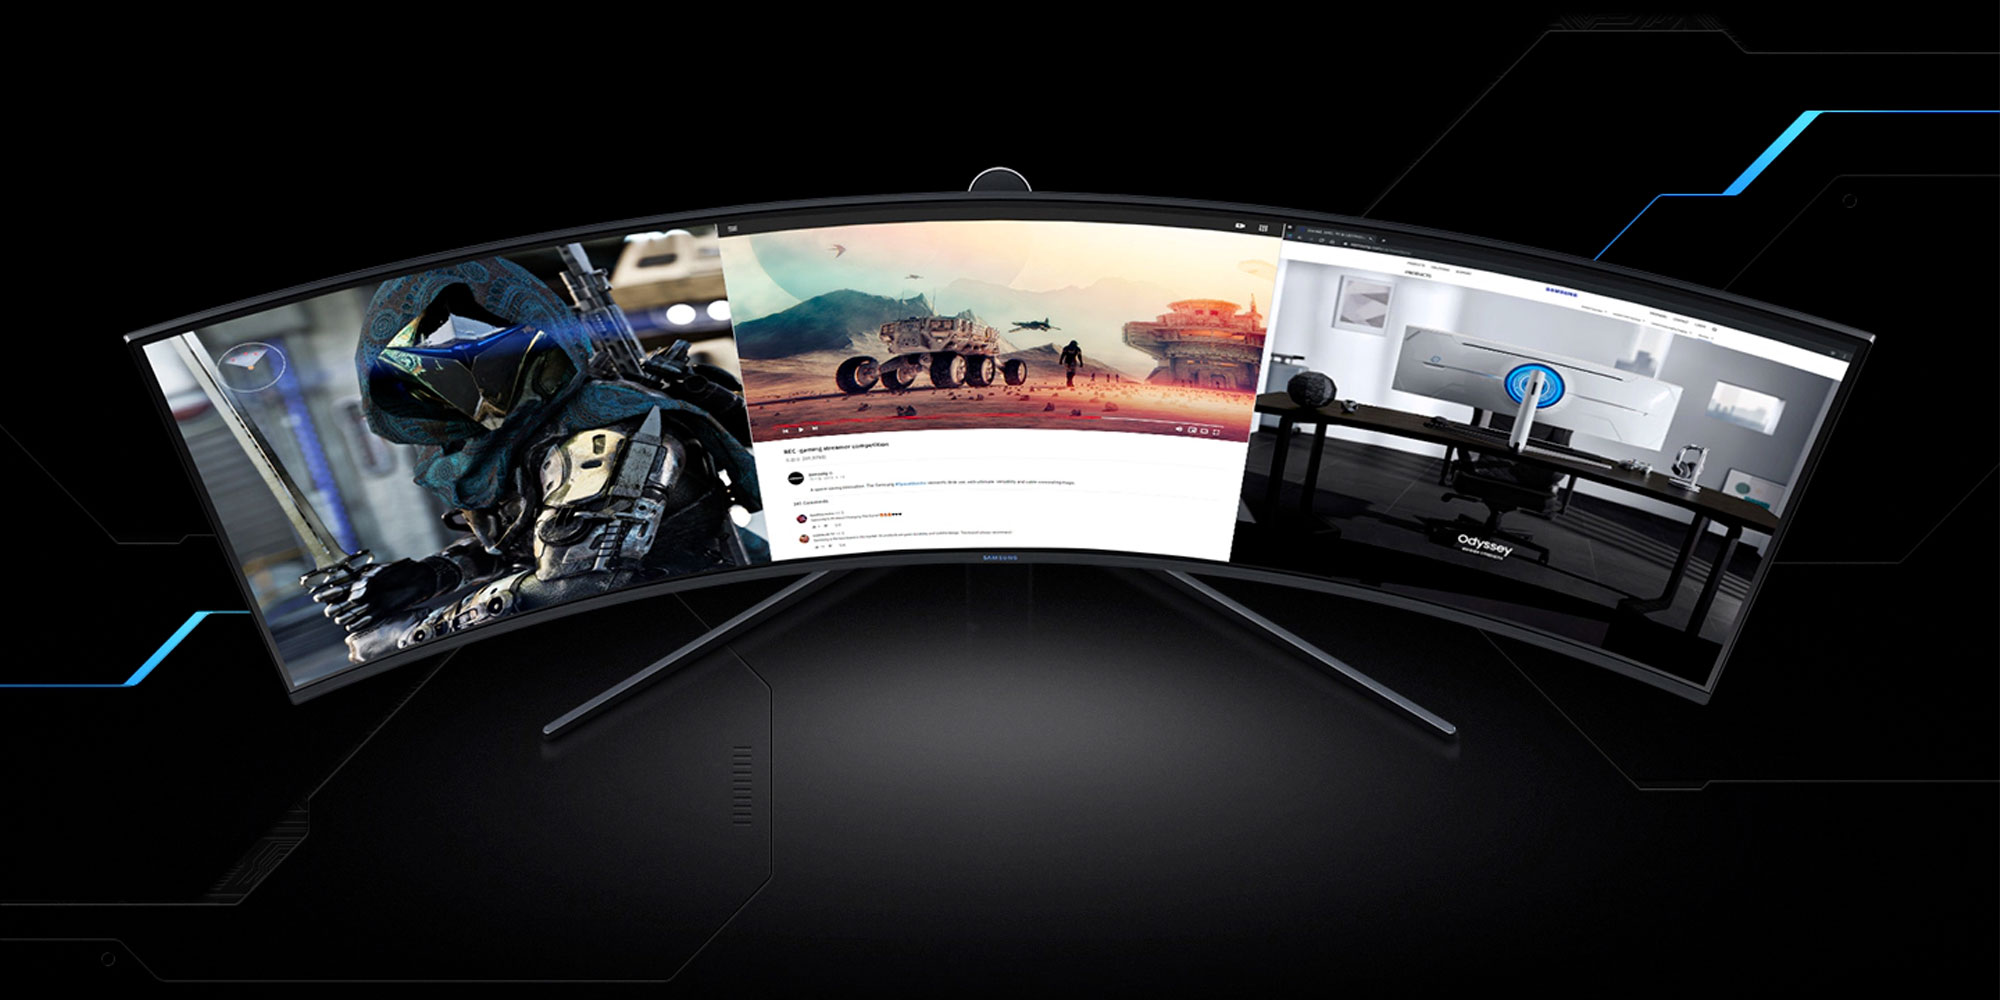 Samsung S Odyssey G9 Gaming Monitor Is 51x1440p 240hz 9to5toys